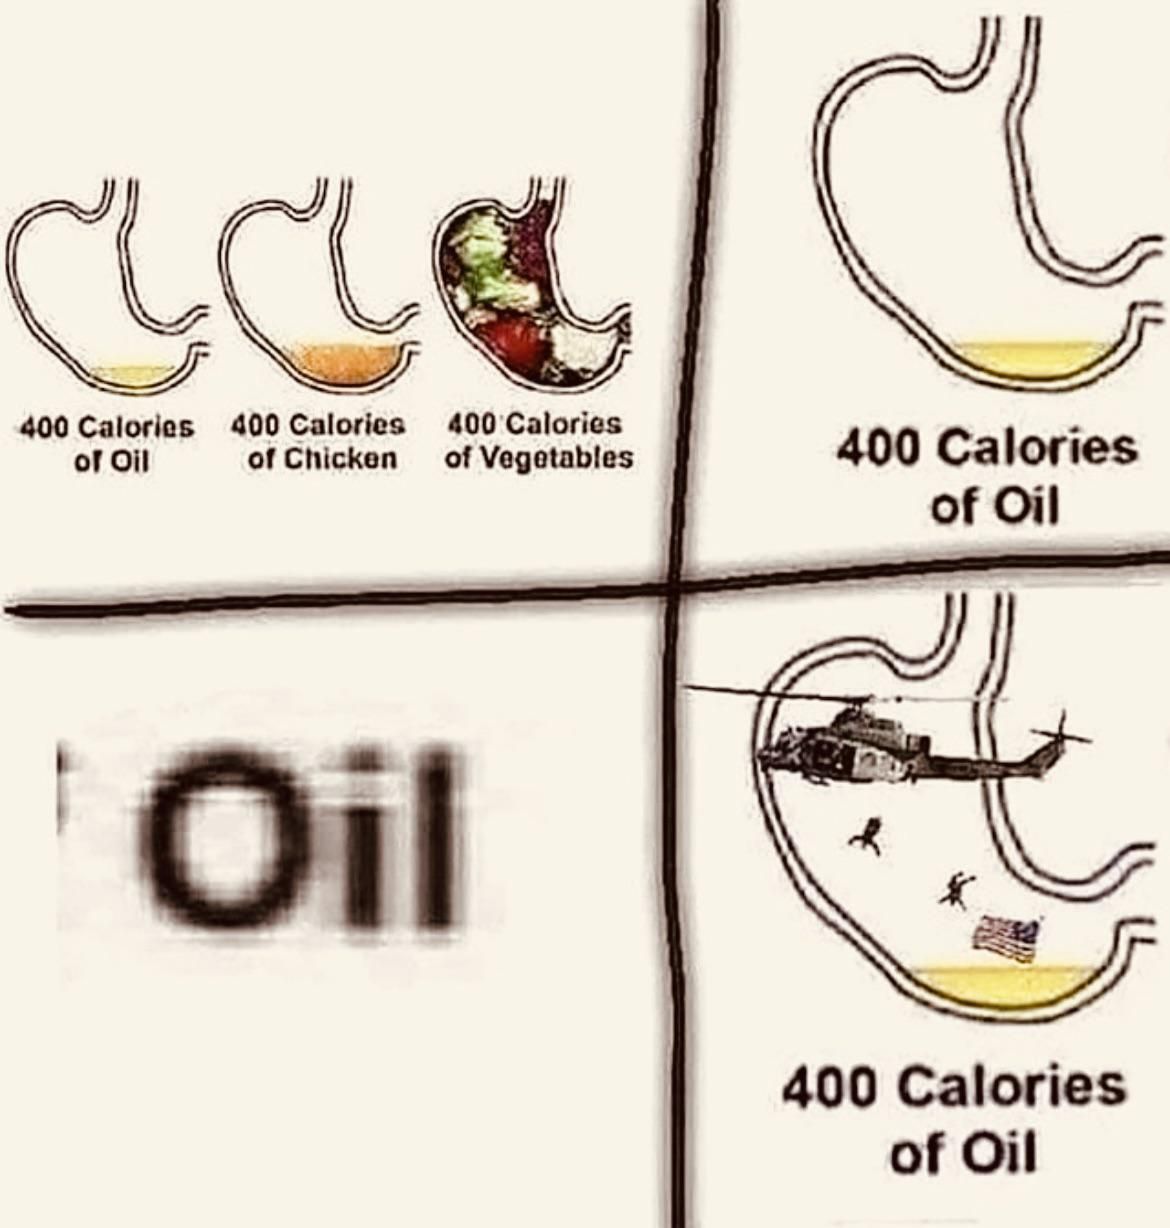 NEED MORE OIL